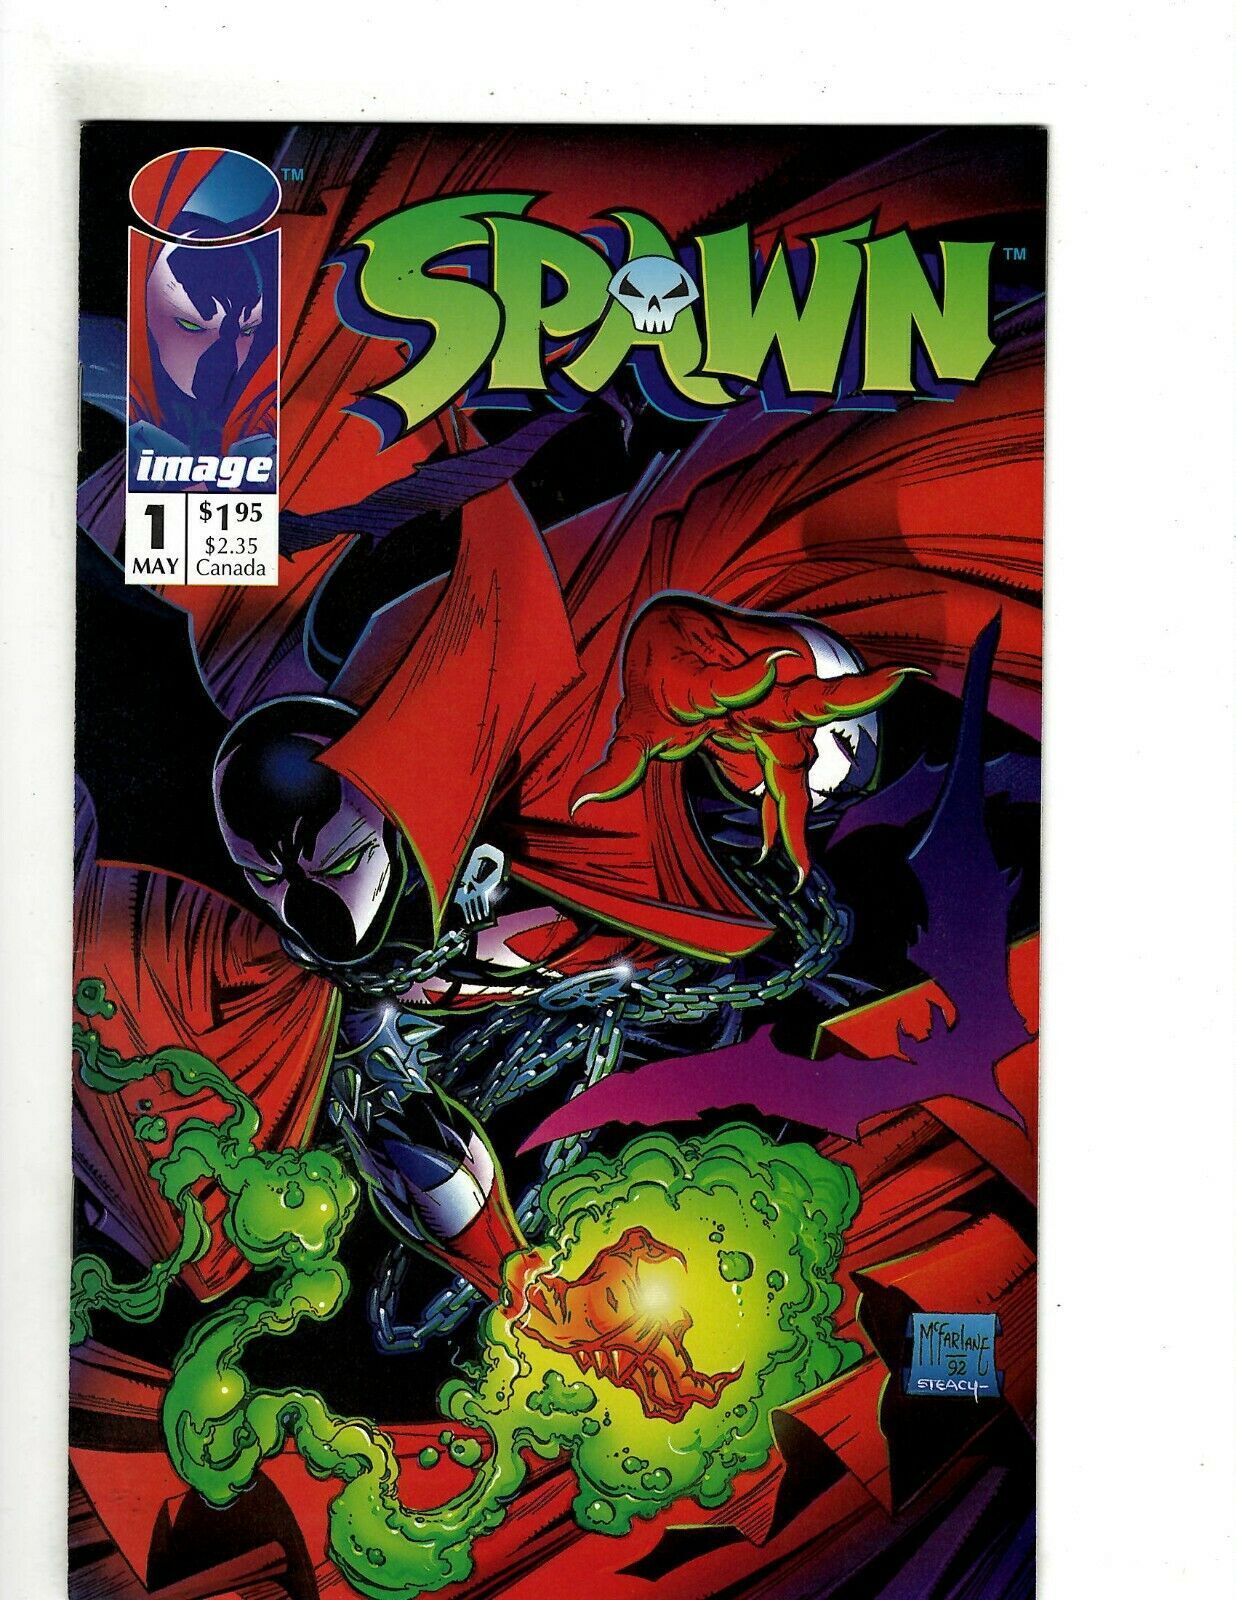 Spawn #79-1st print VF/NM 150 copies available!